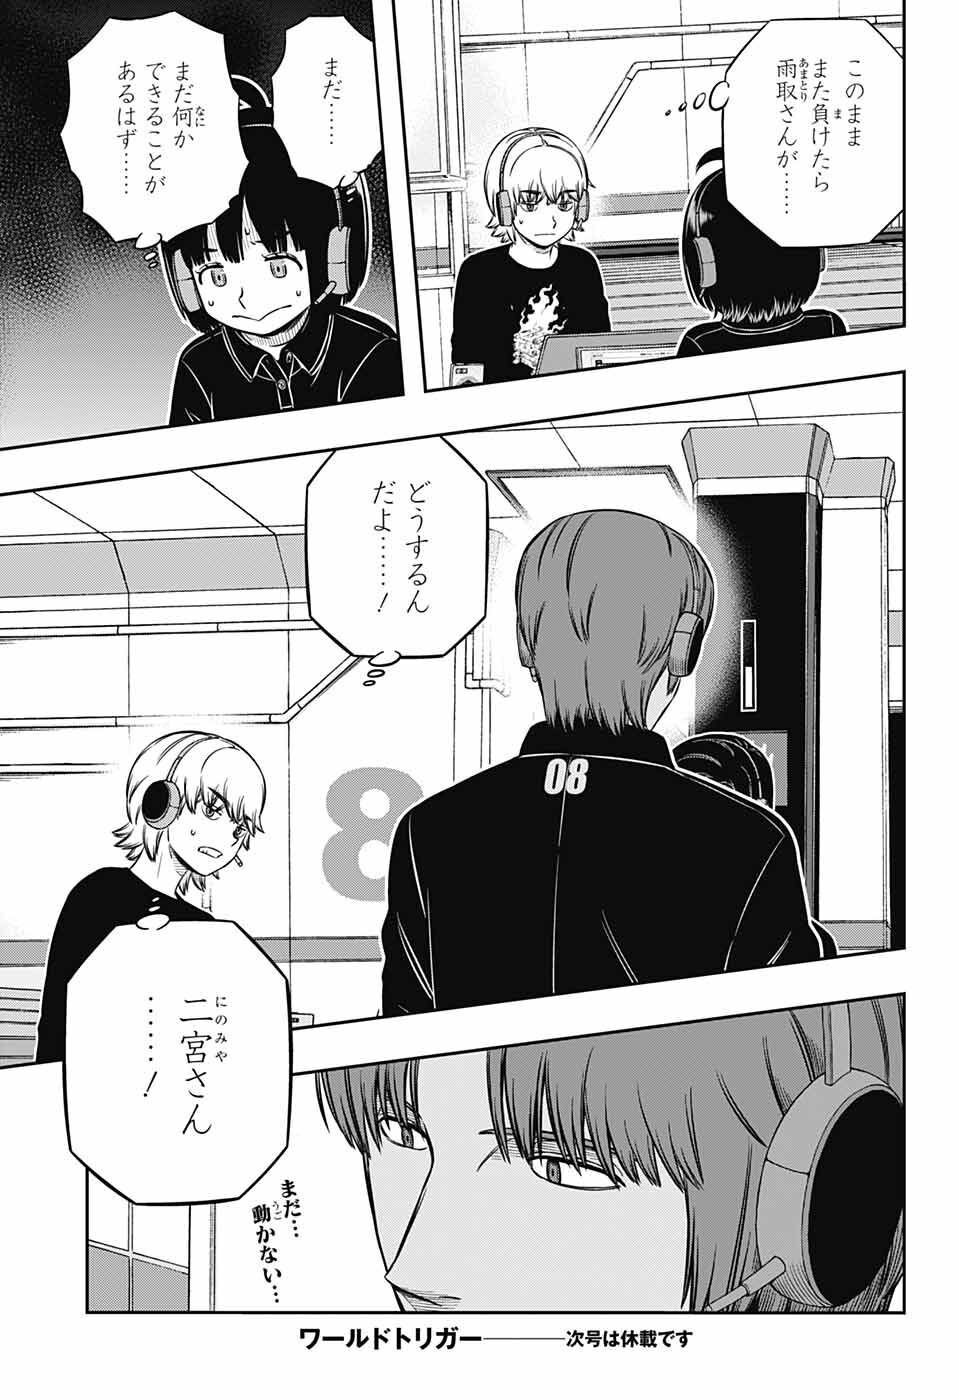 World Trigger - Chapter 232 - Page 21